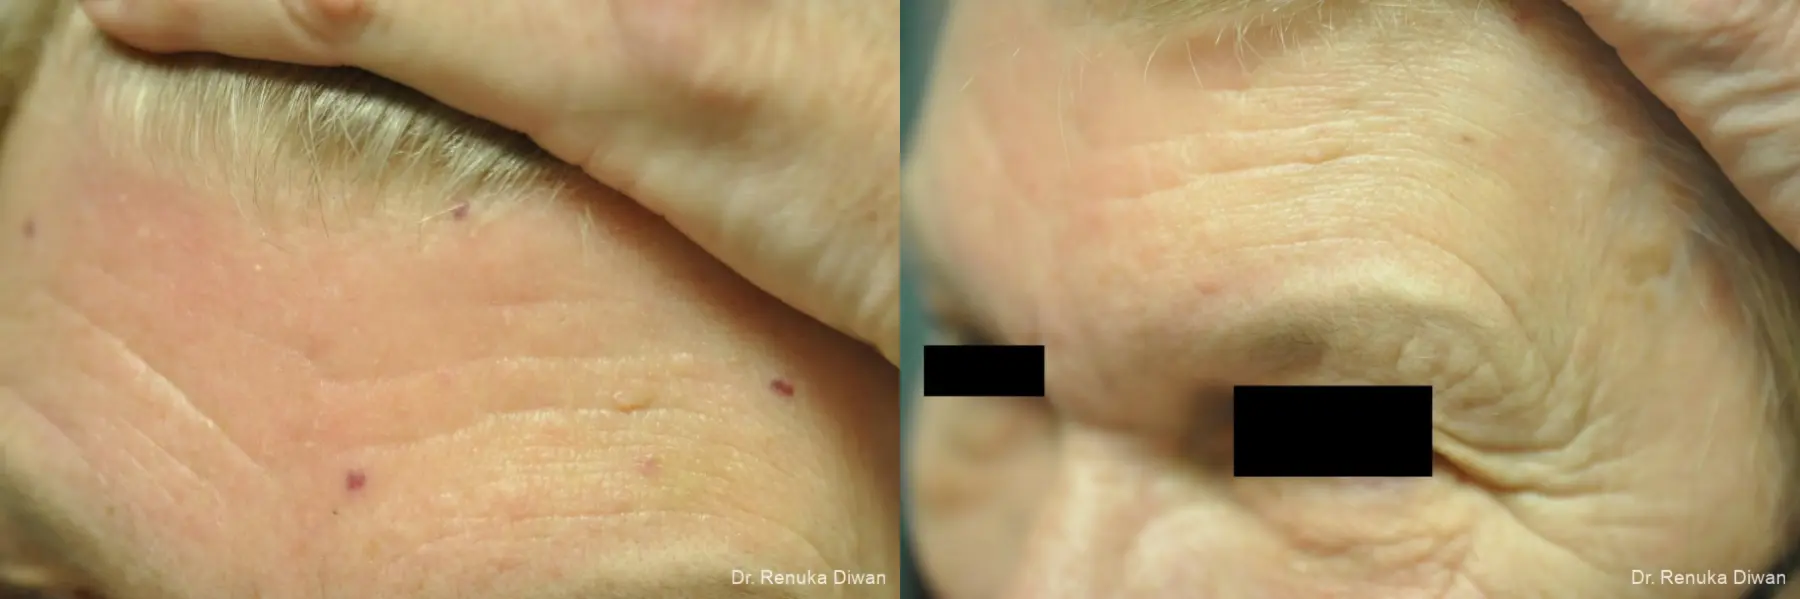 Laser For Veins And Redness: Patient 23 - Before and After 2